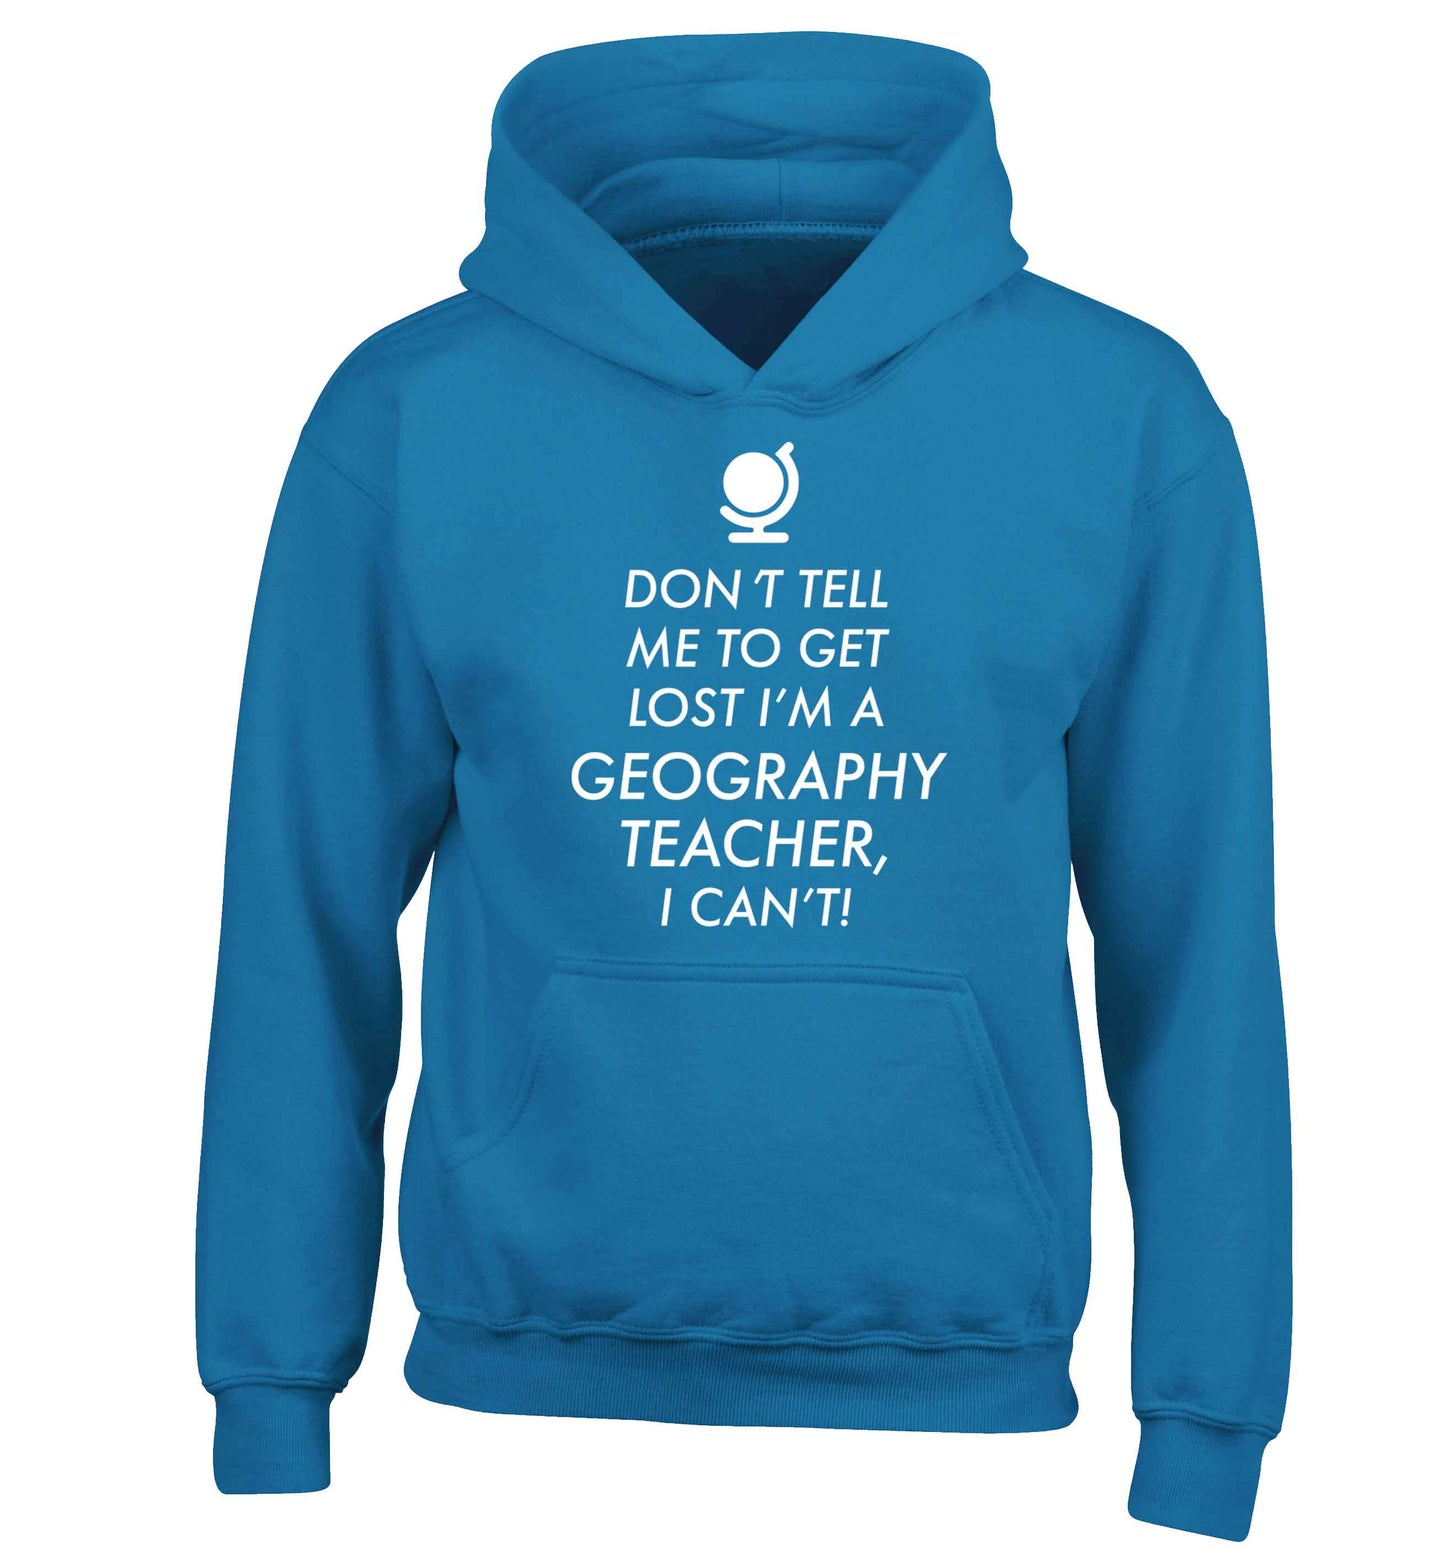 Don't tell me to get lost I'm a geography teacher, I can't children's blue hoodie 12-13 Years